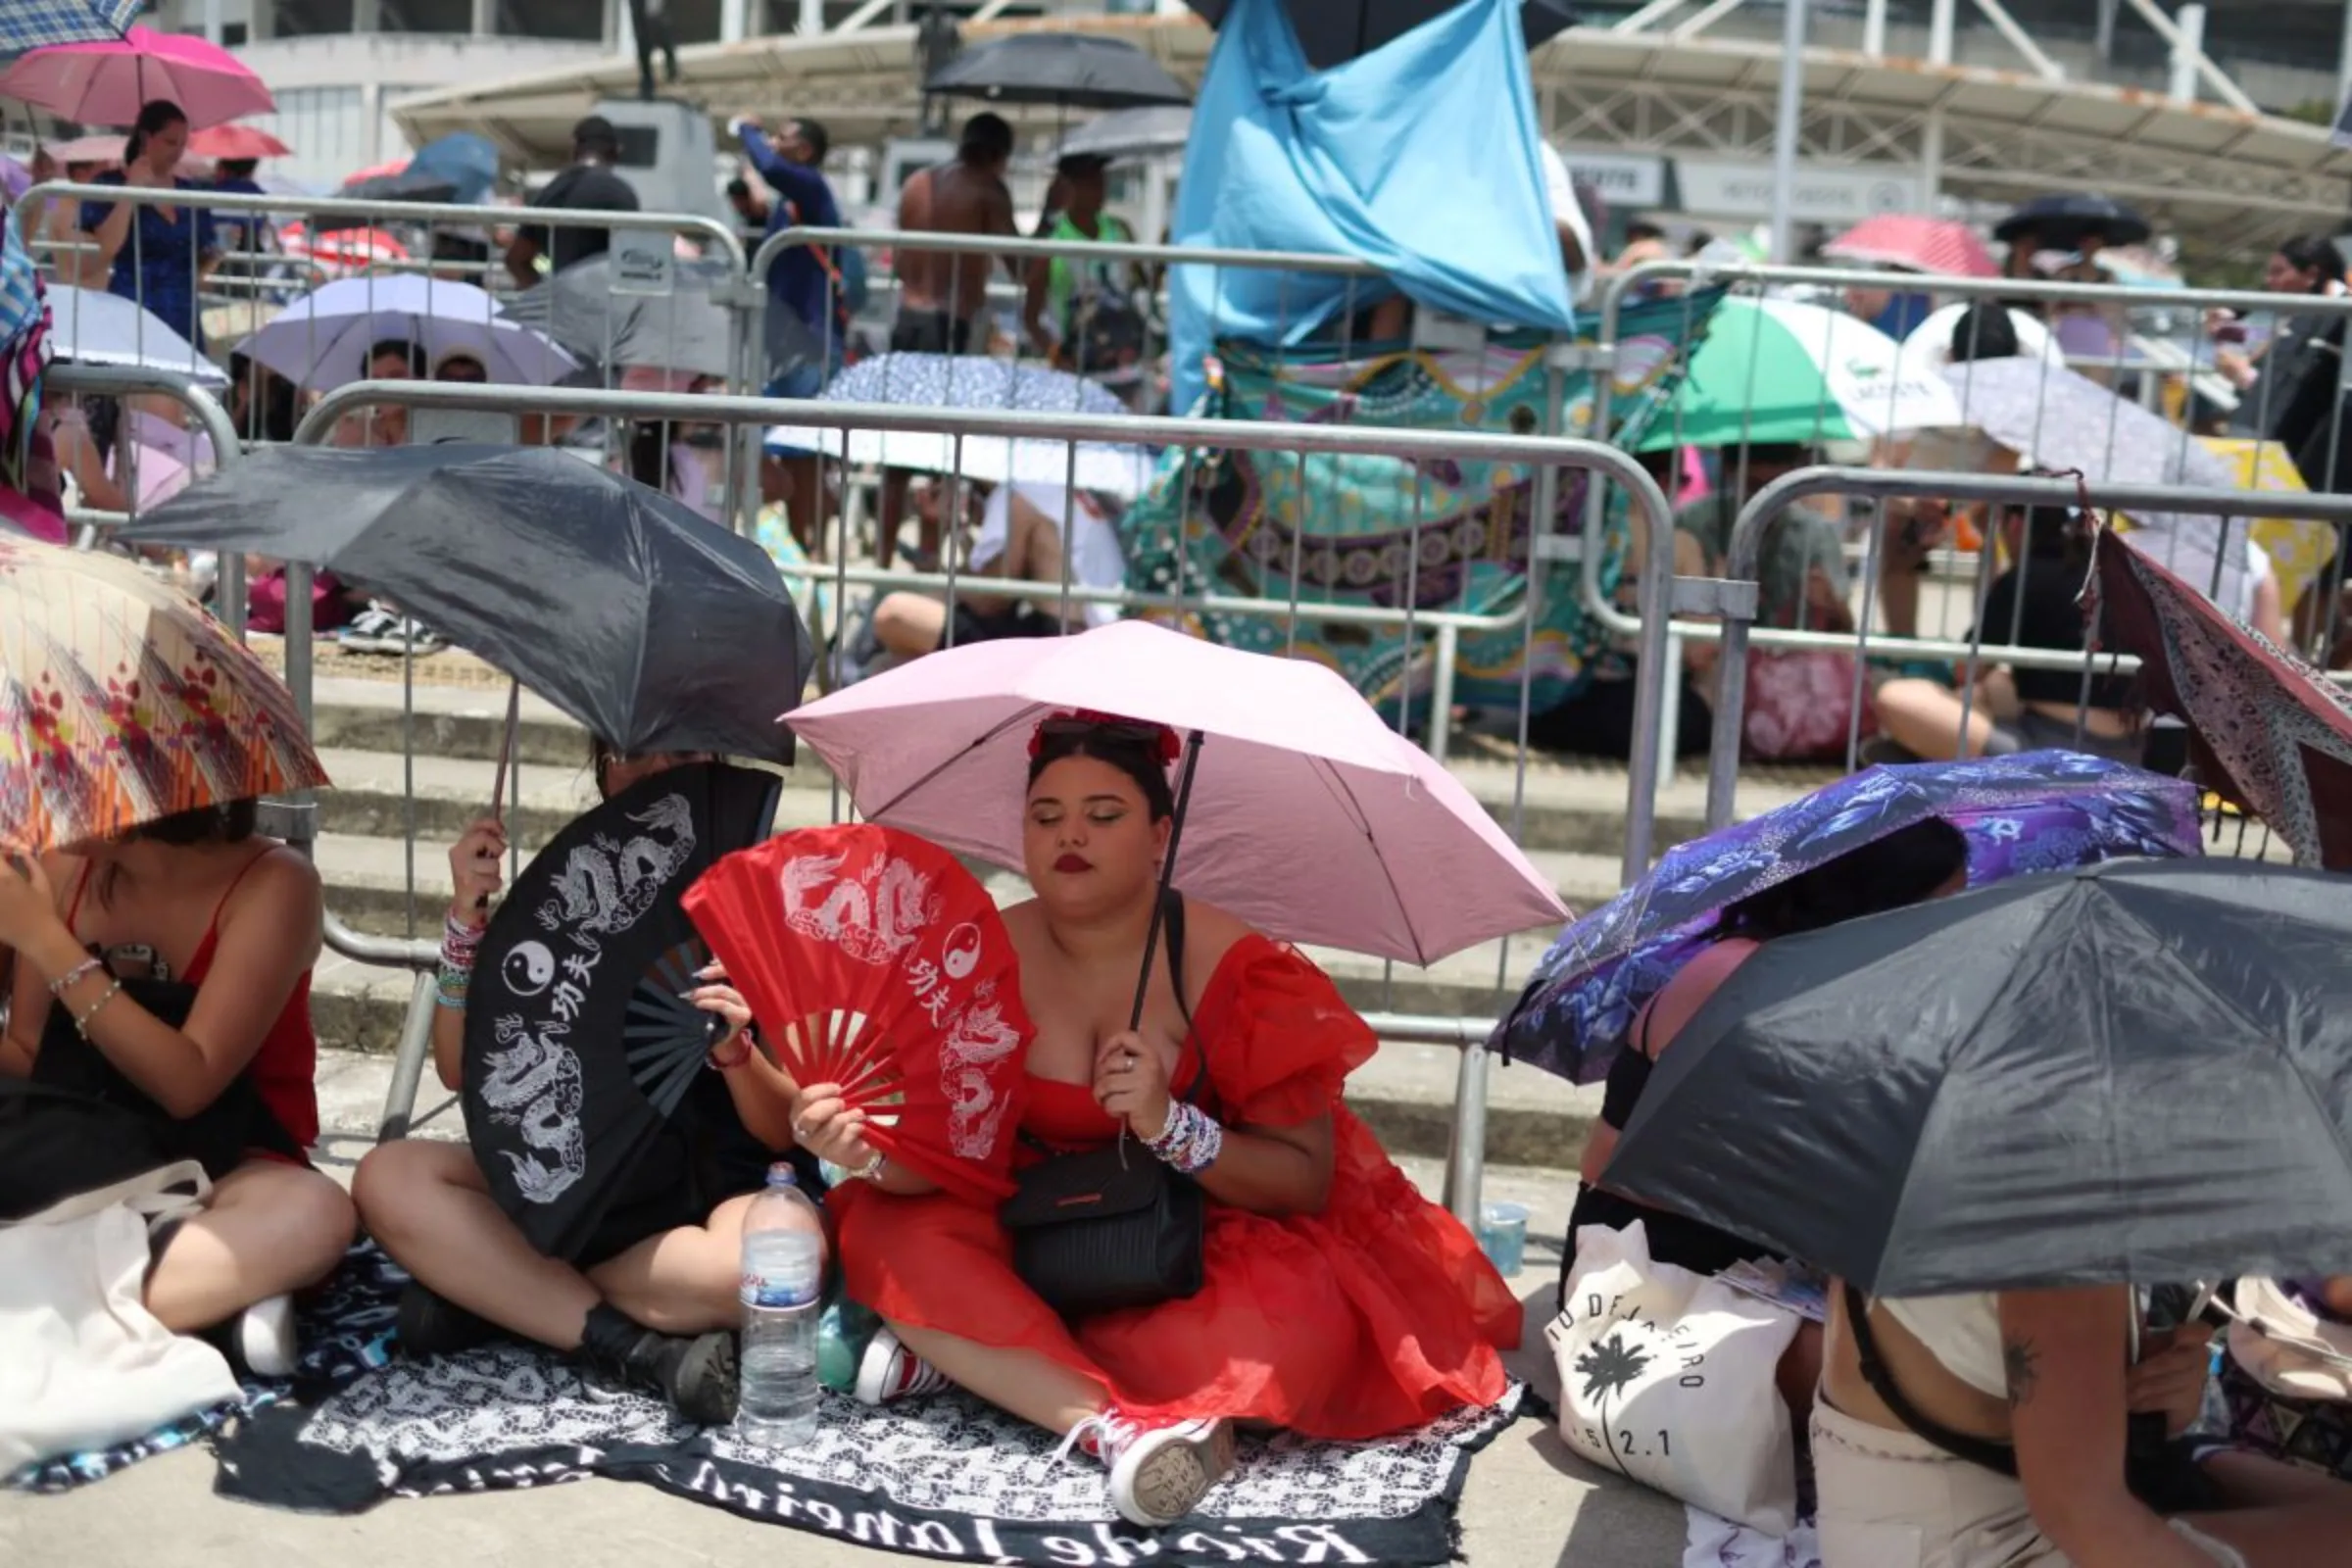 A girl using a fan waits among other people before the Taylor Swift concert, following the death of a fan due to the heat during the first day concert, in Rio de Janeiro, Brazil